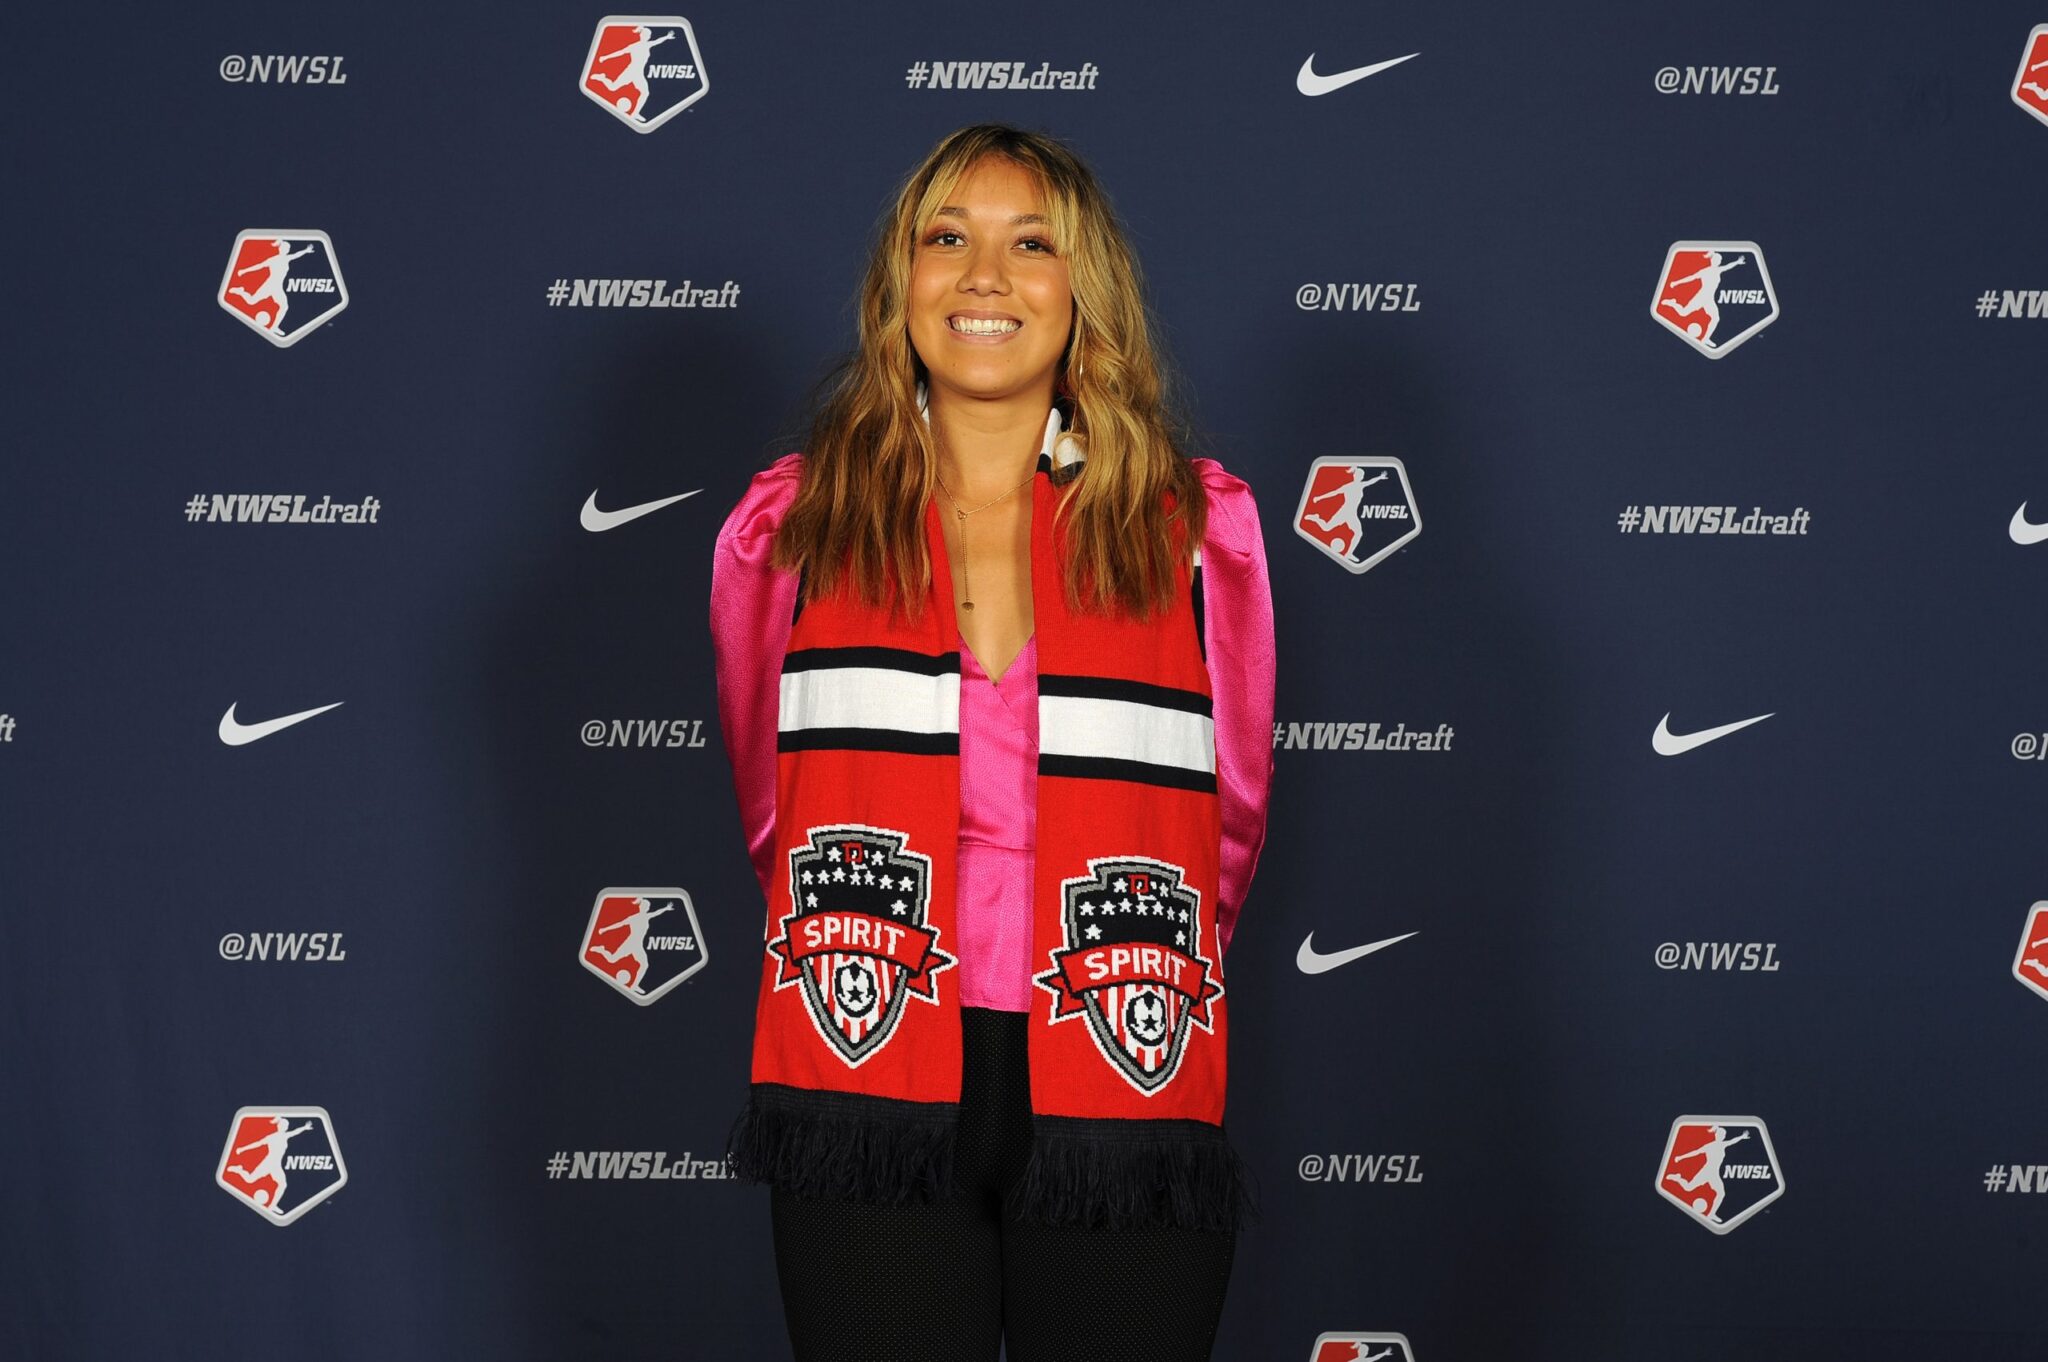 Washington Spirit select Kaiya McCullough 32nd overall in 2020 NWSL Draft Featured Image